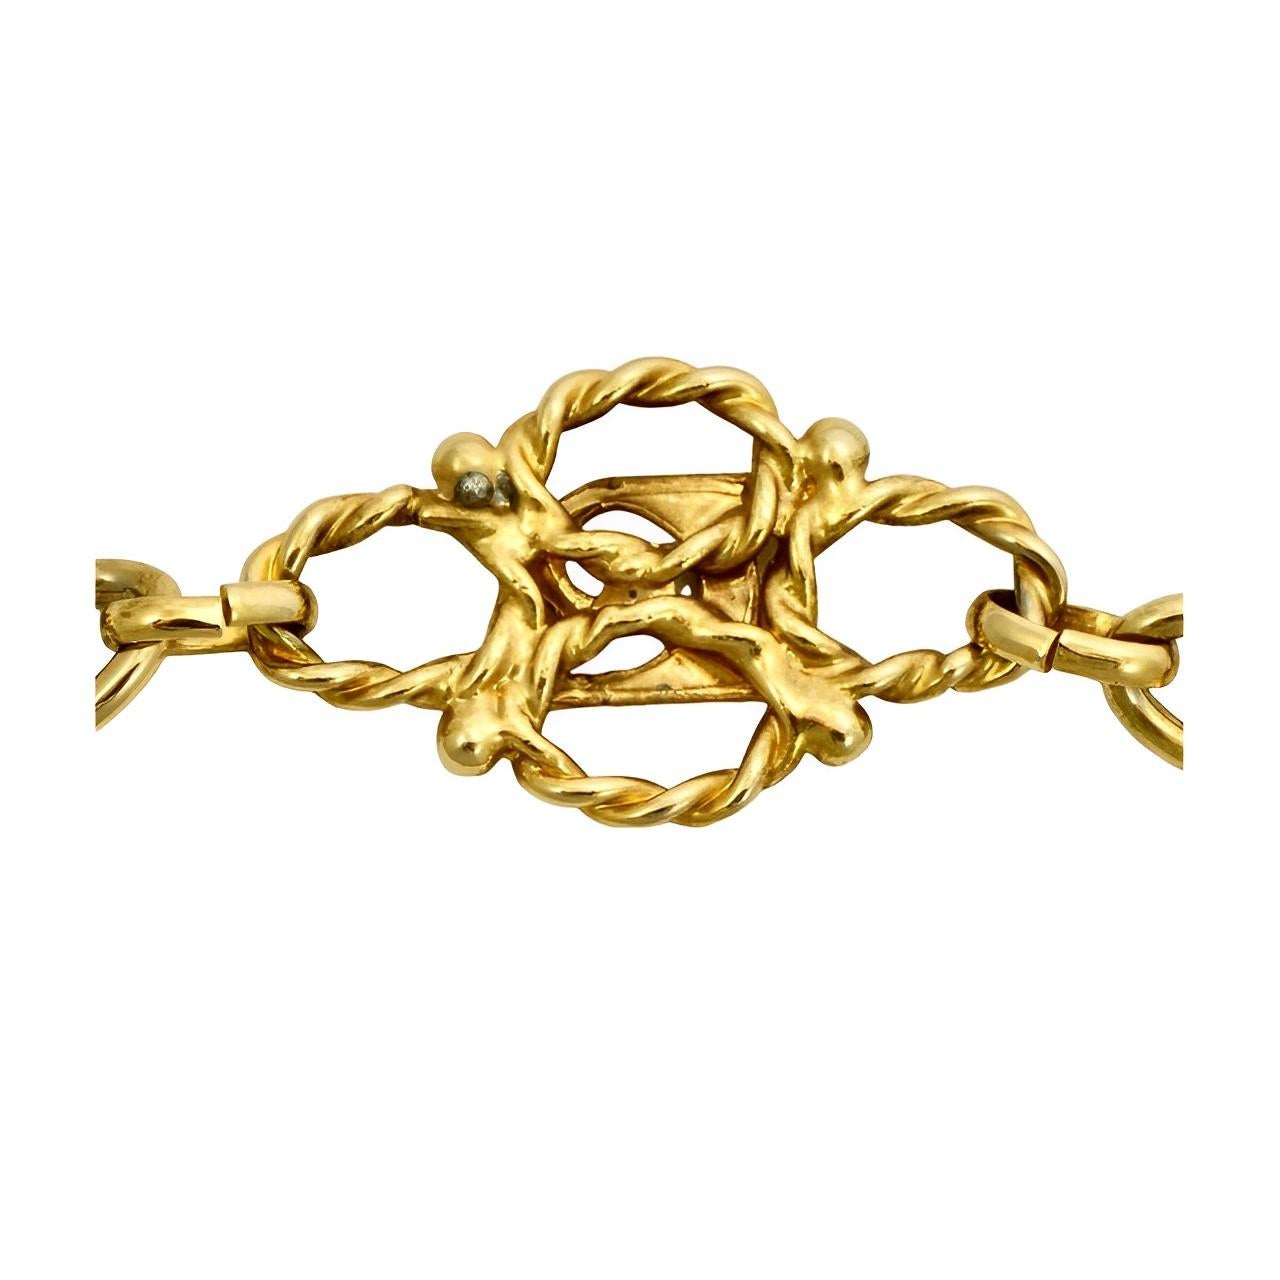 Women's or Men's Pierre Cardin Monogram Gold Plated Chain Link Belt circa 1970s For Sale